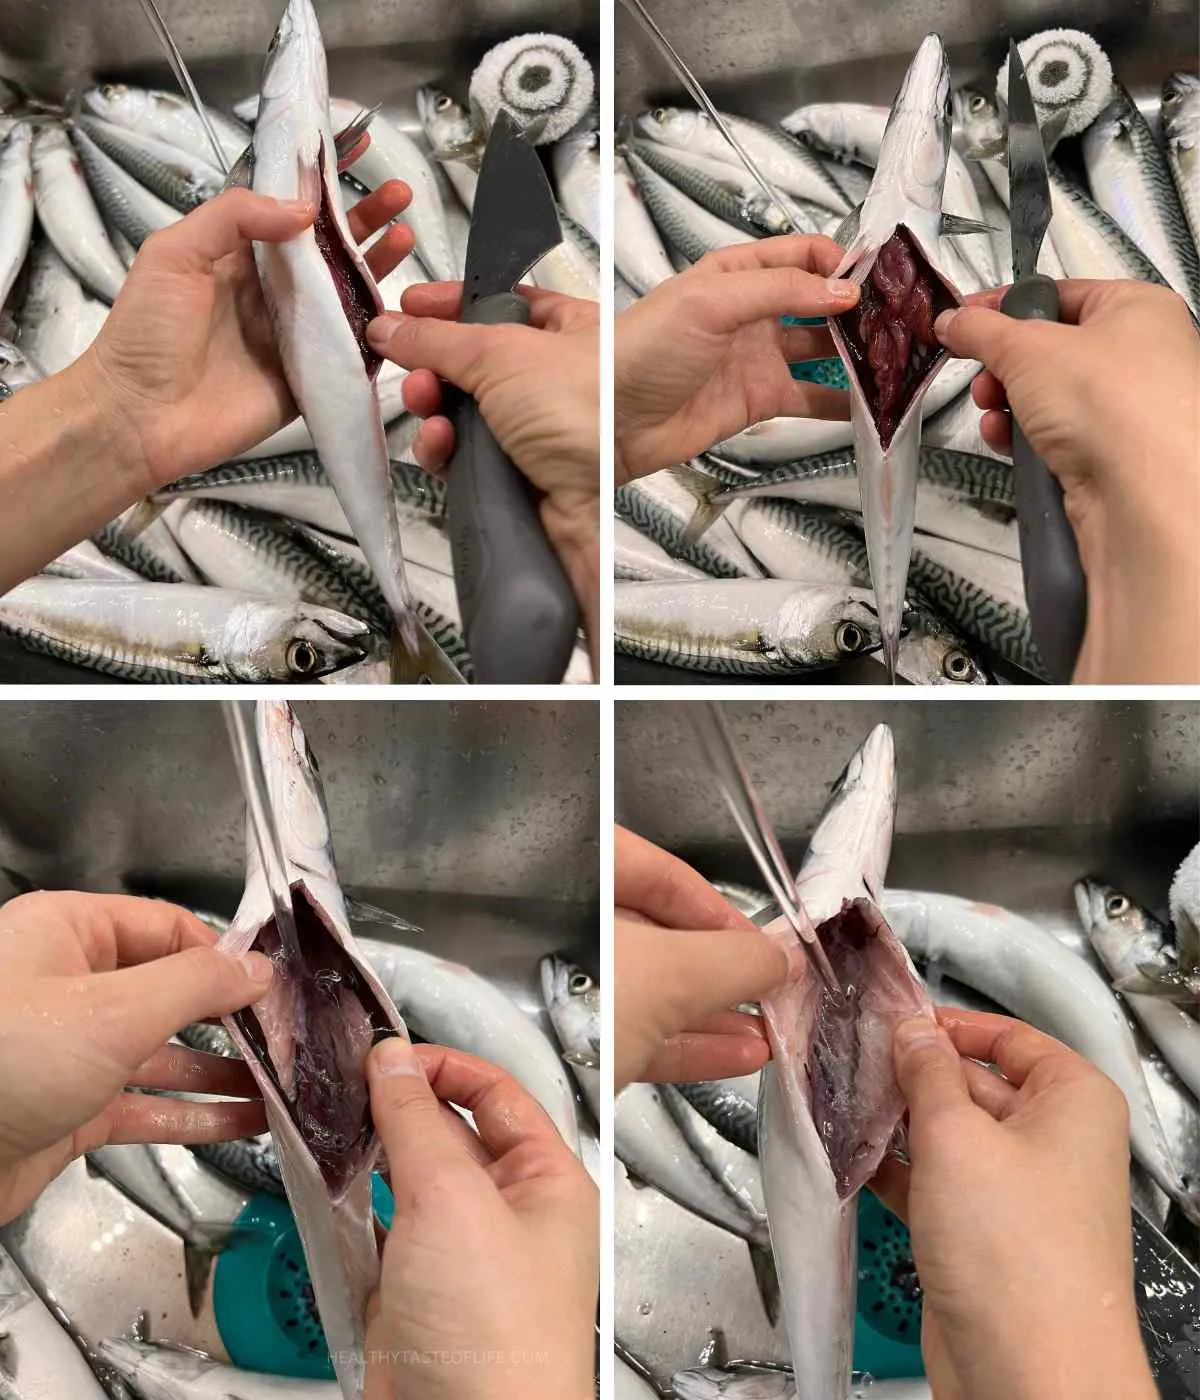 Preparing the fish for fermentation by removing the guts by making a slit along the fish's belly and pulling out the internal organs.